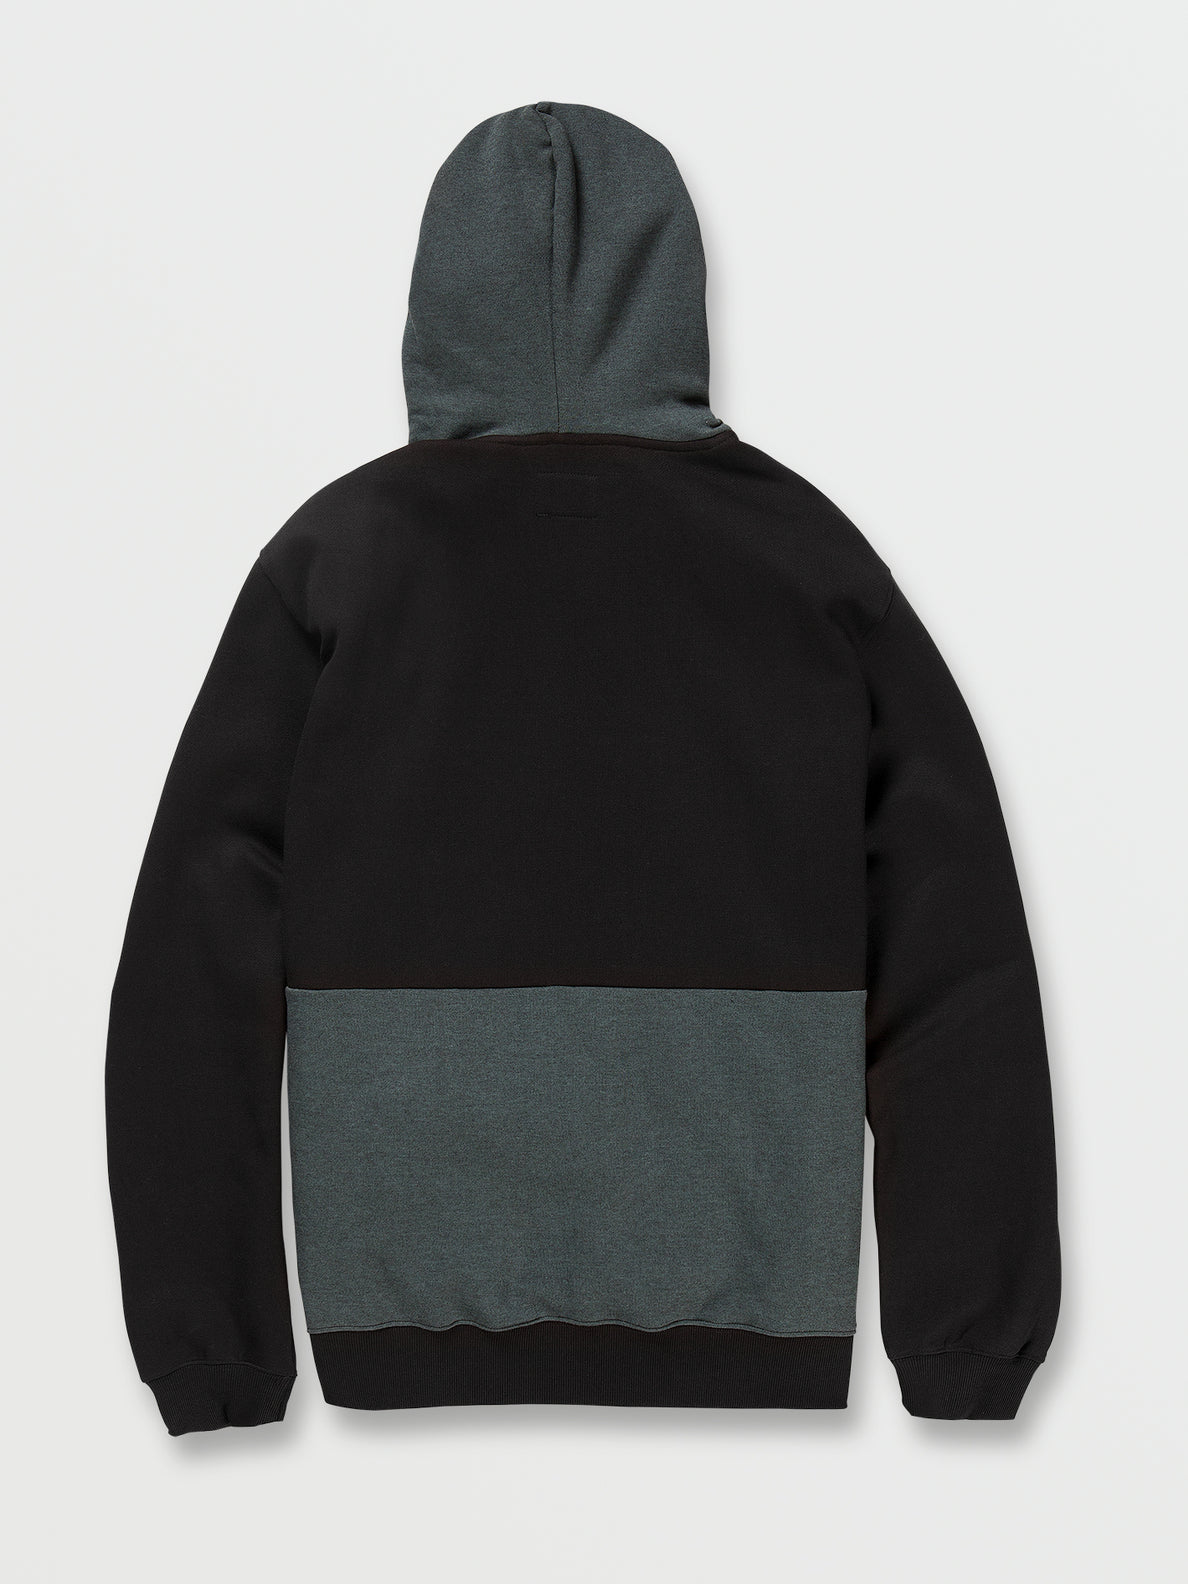 Forzee Pullover Hoodie - Black (A4132204_BLK) [B]